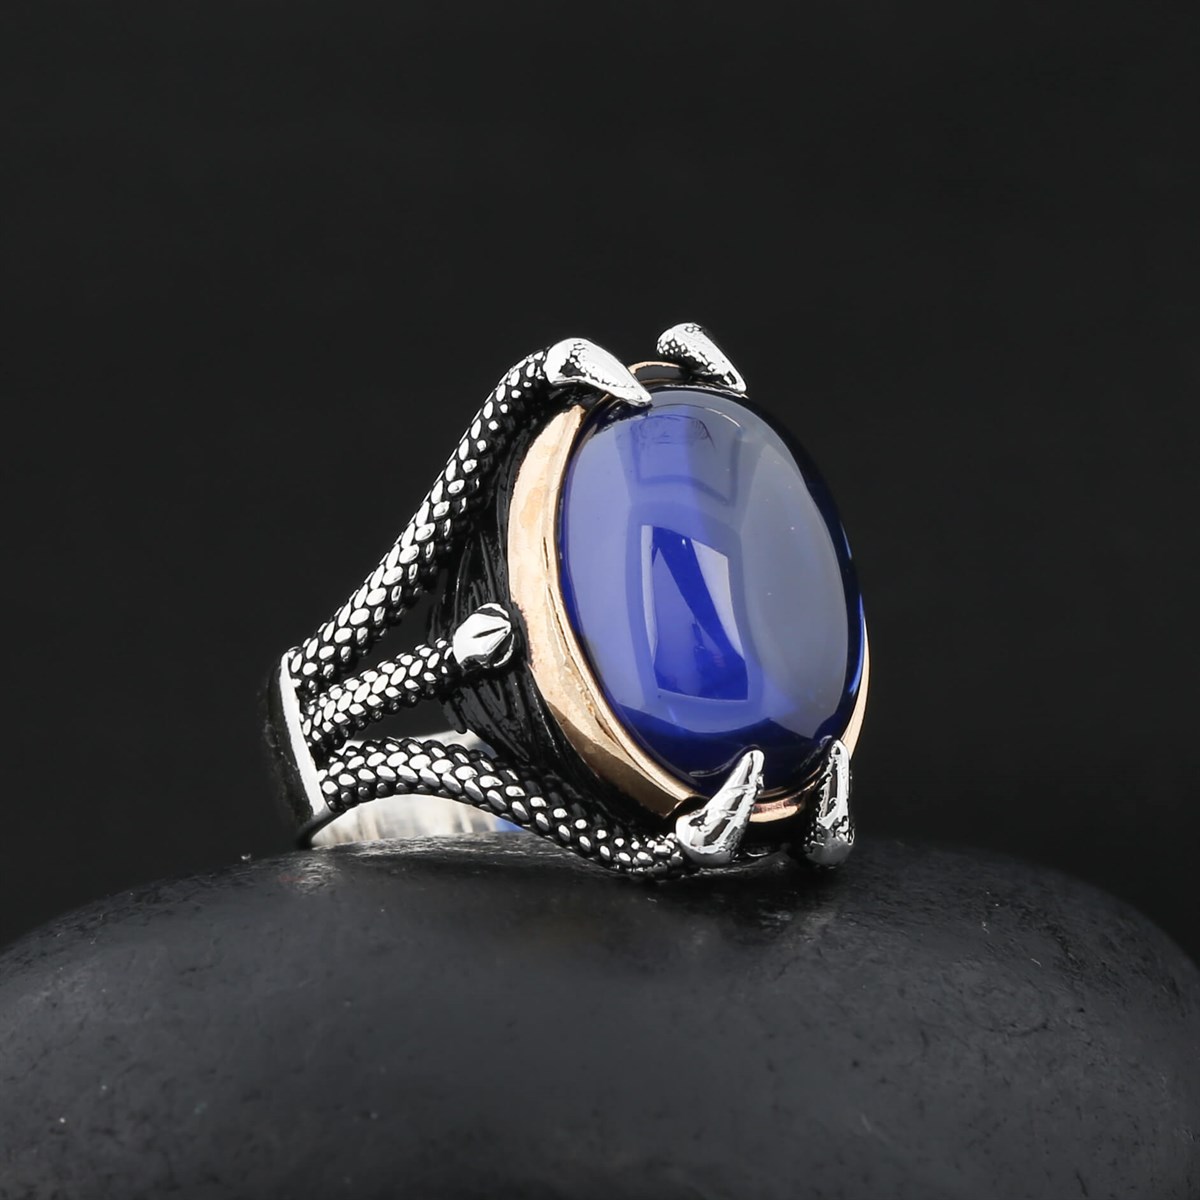 Navy Blue Hooded Stone Claw Sterling Silver Men's Ring